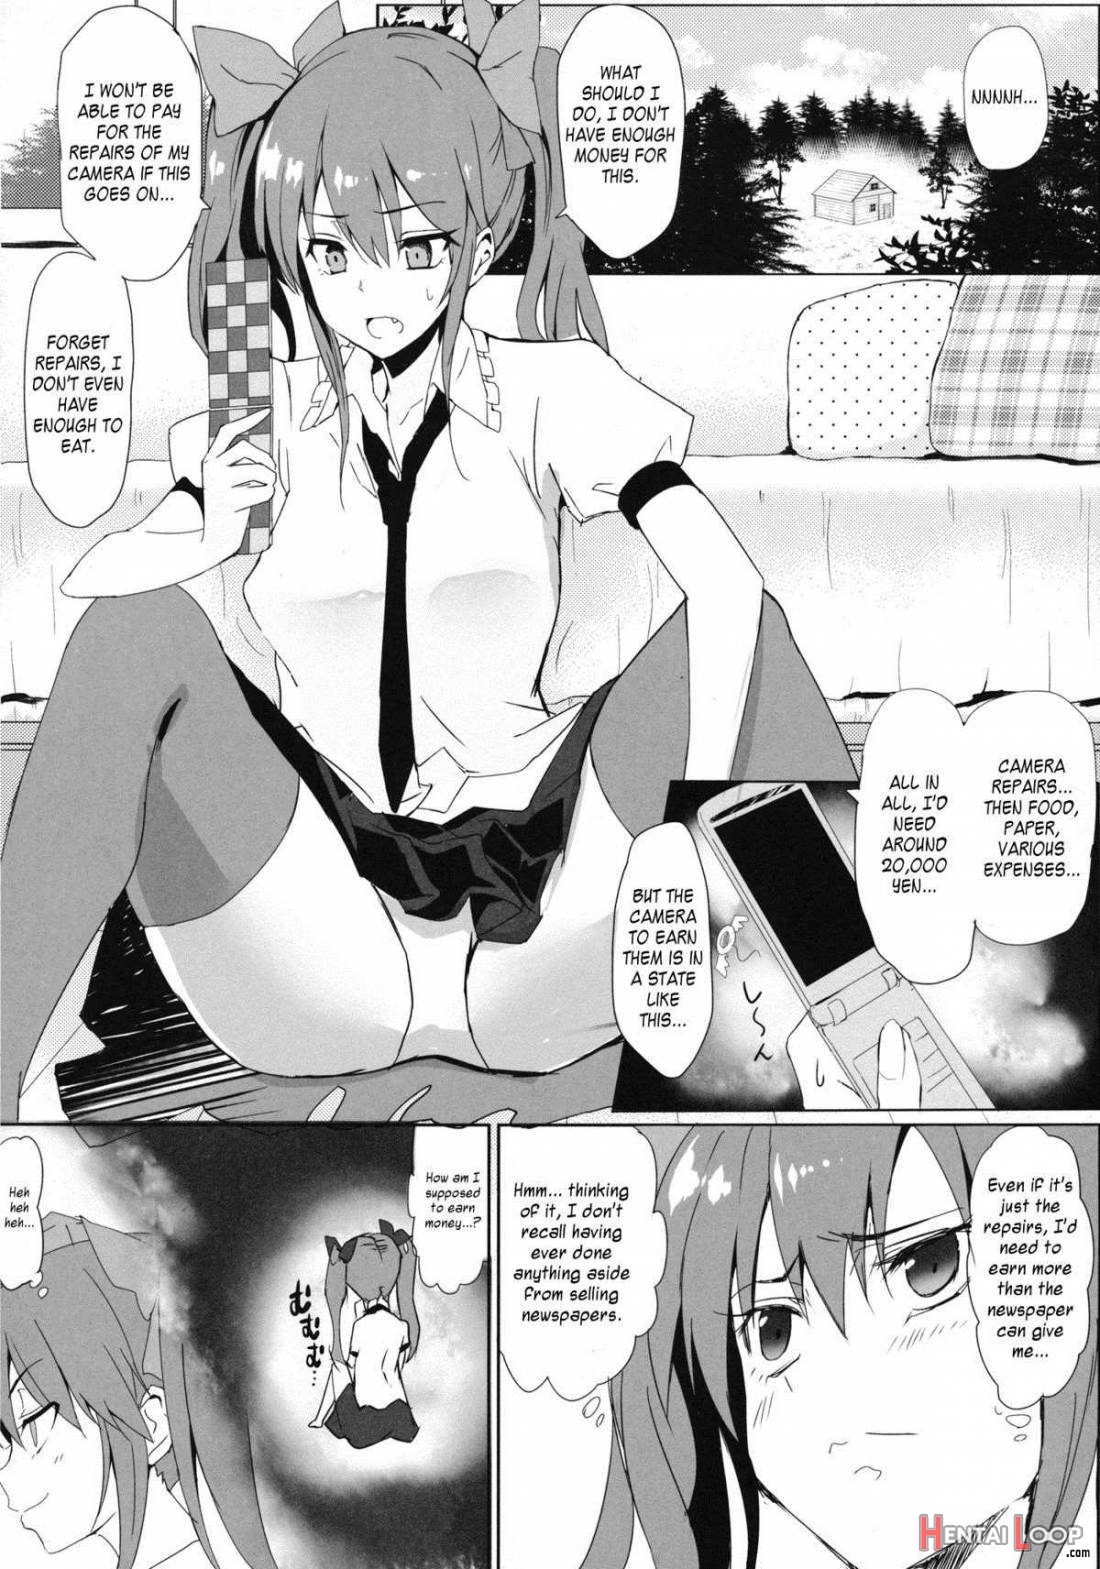 Hatate-chan No Arbeit page 3